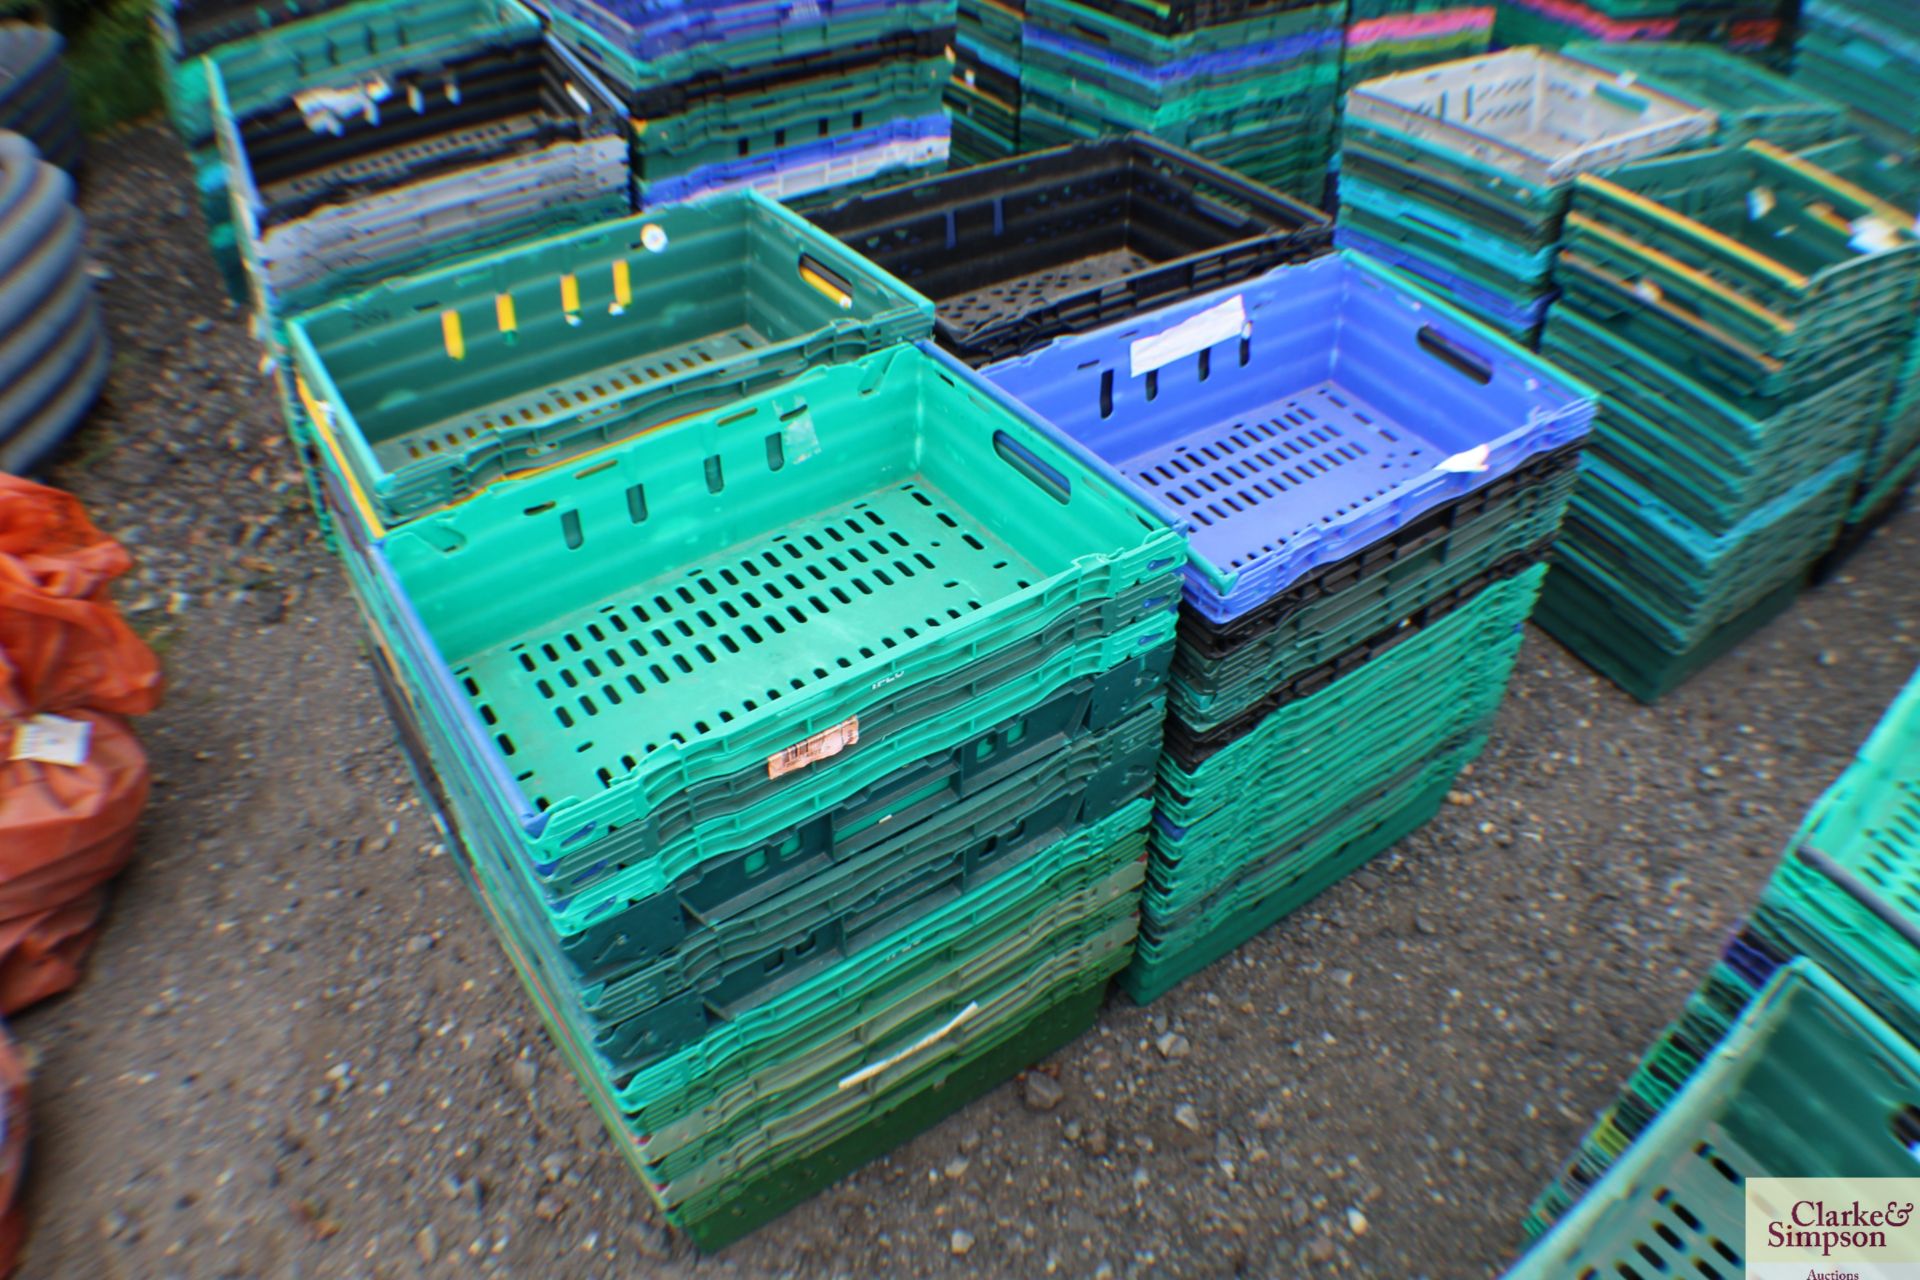 c.50x vegetable/ produce stacking crates.